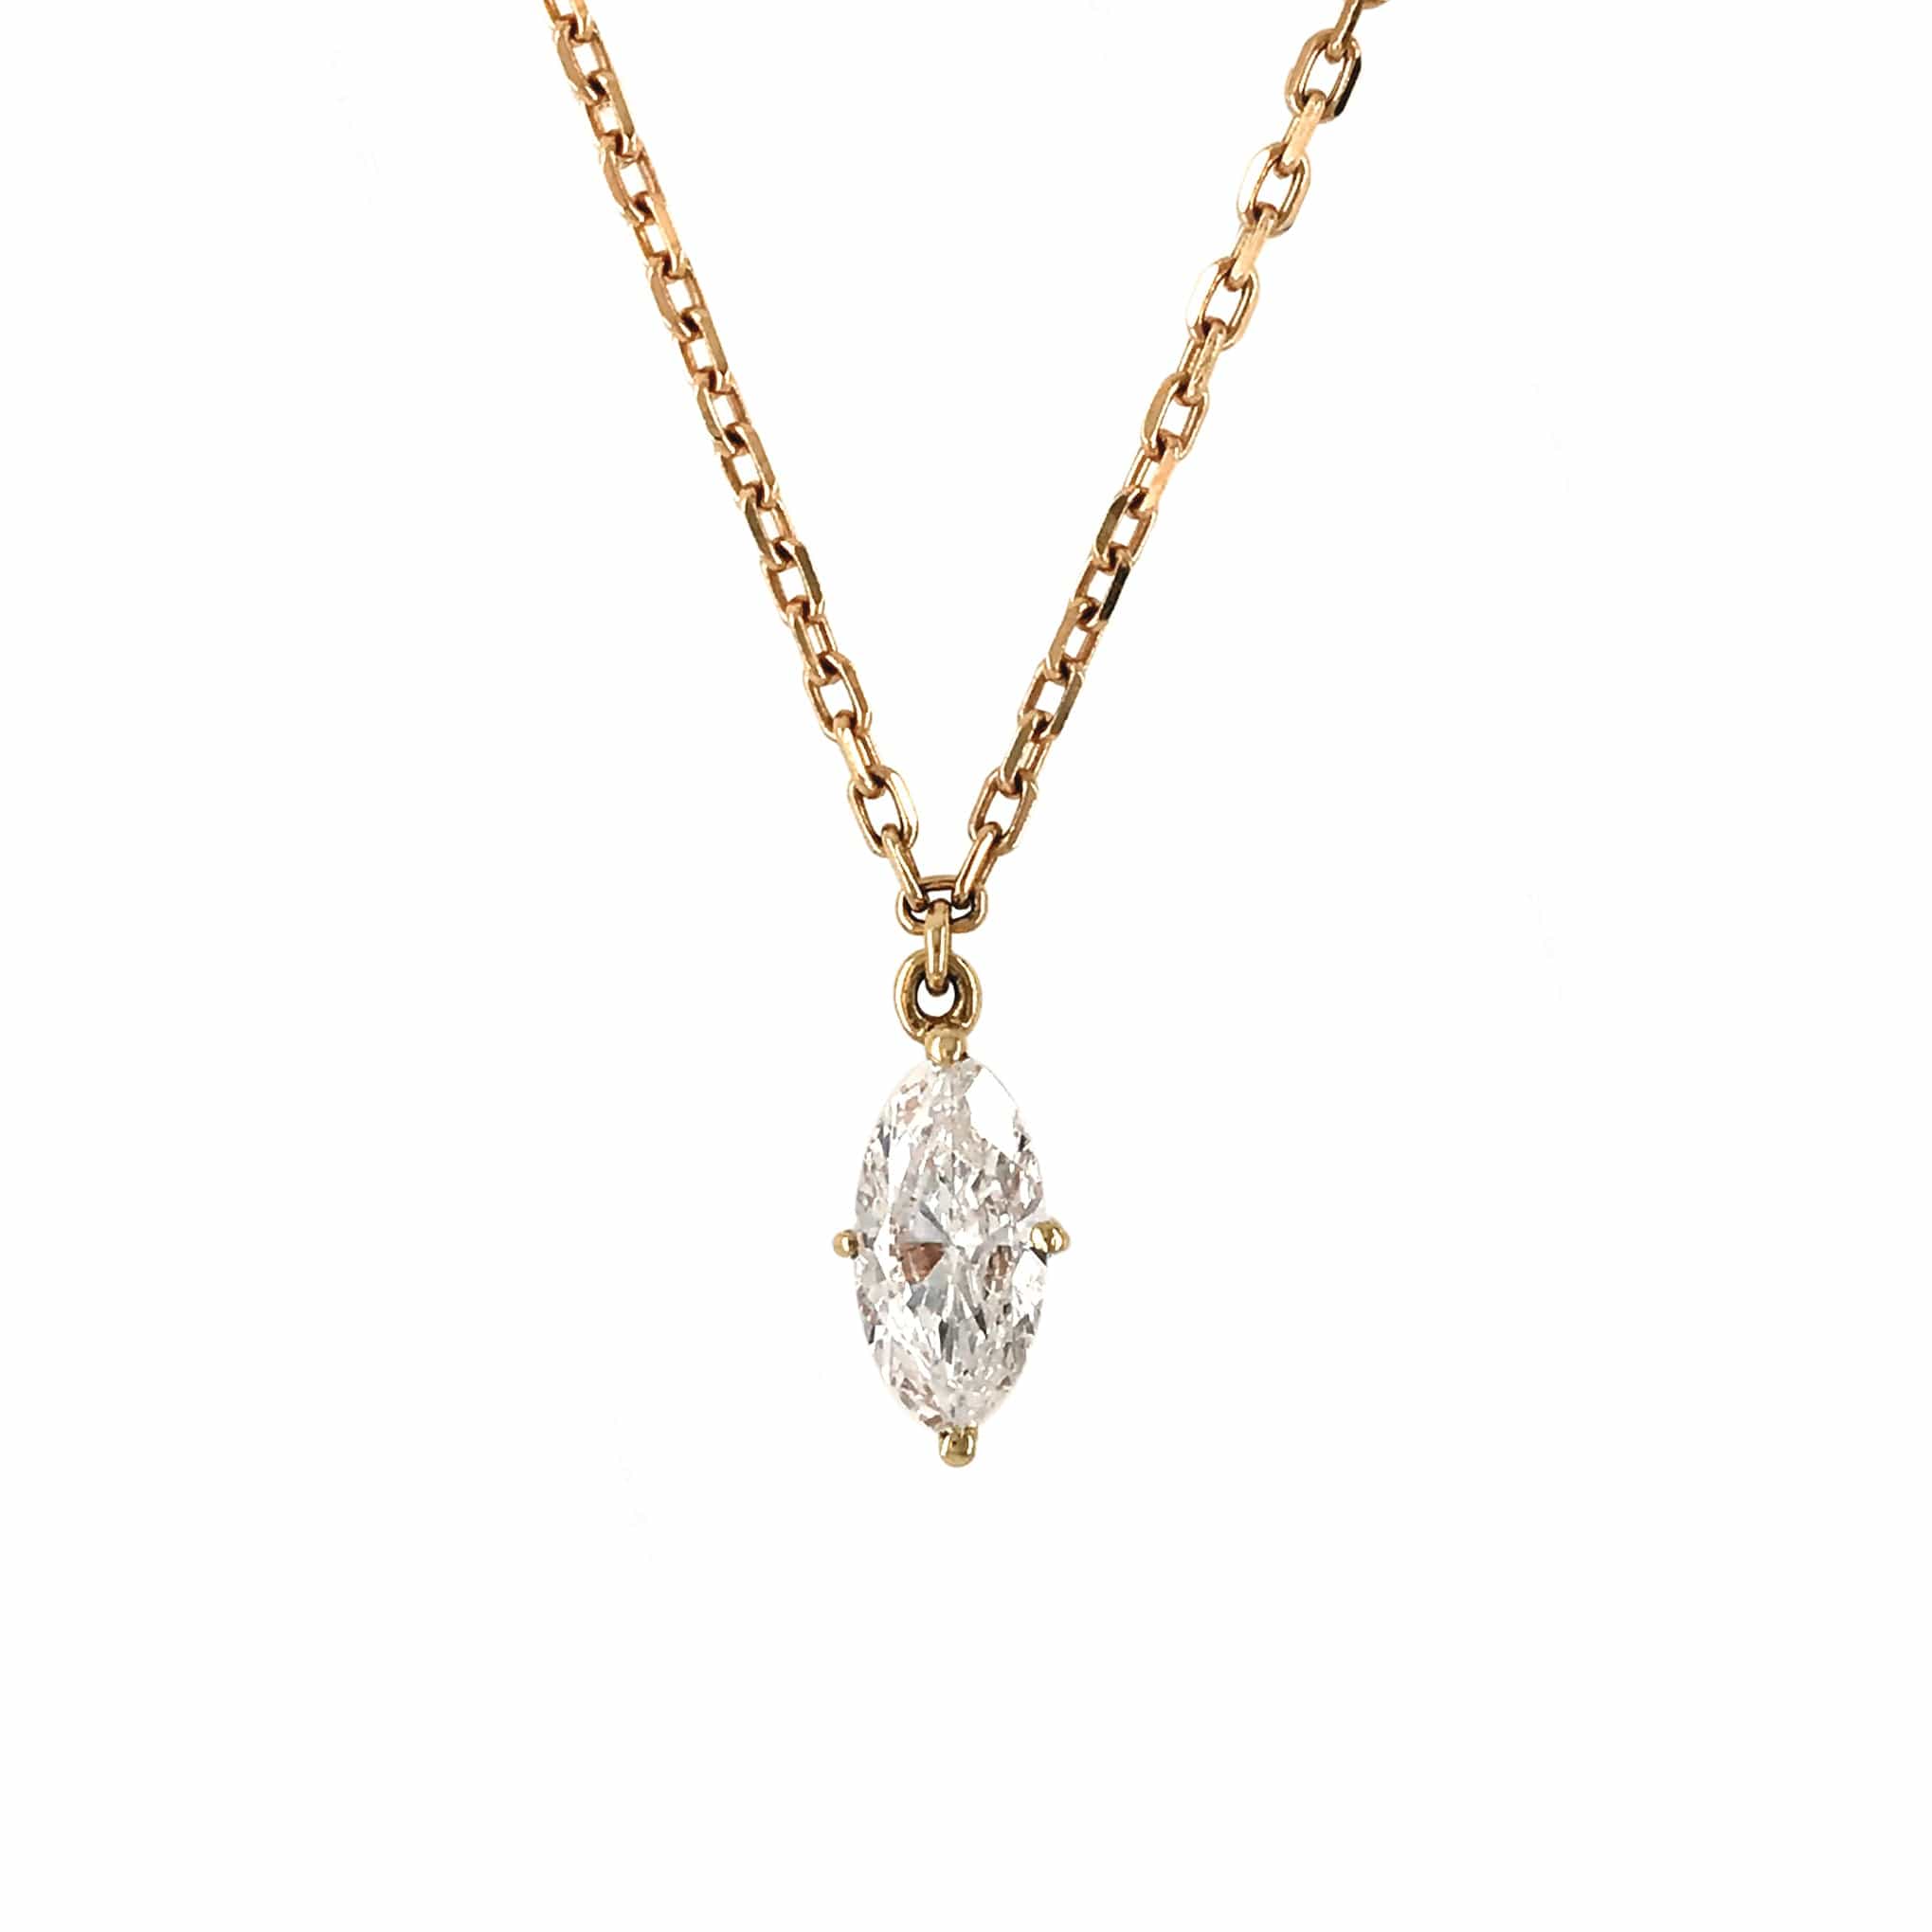 M.Fitaihi Everyday Sparkle - Gold with Diamond Necklace - M.Fitaihi